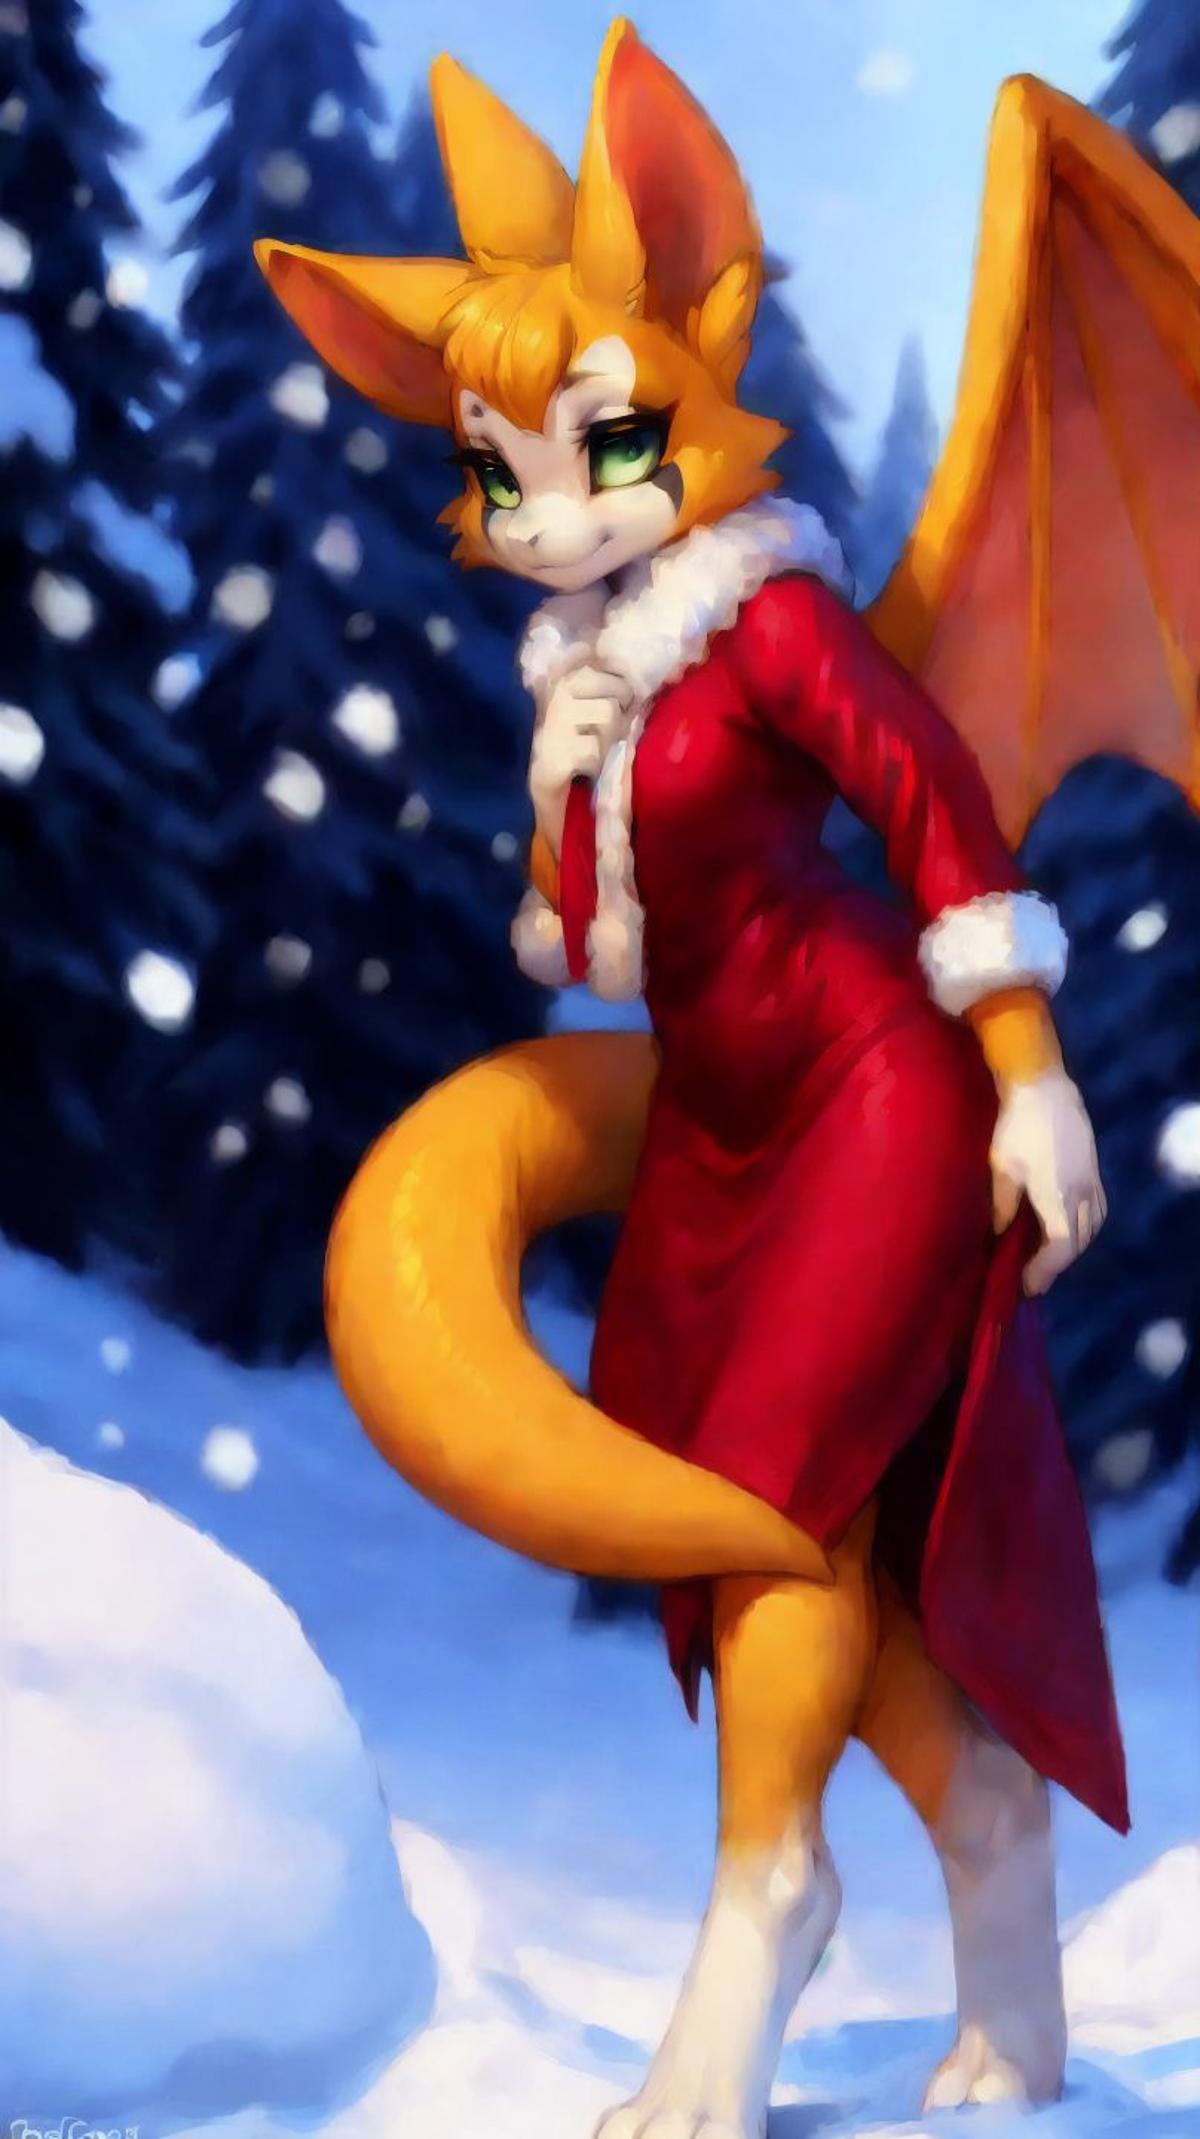 Fidget dust: an elysian tail image by marusame